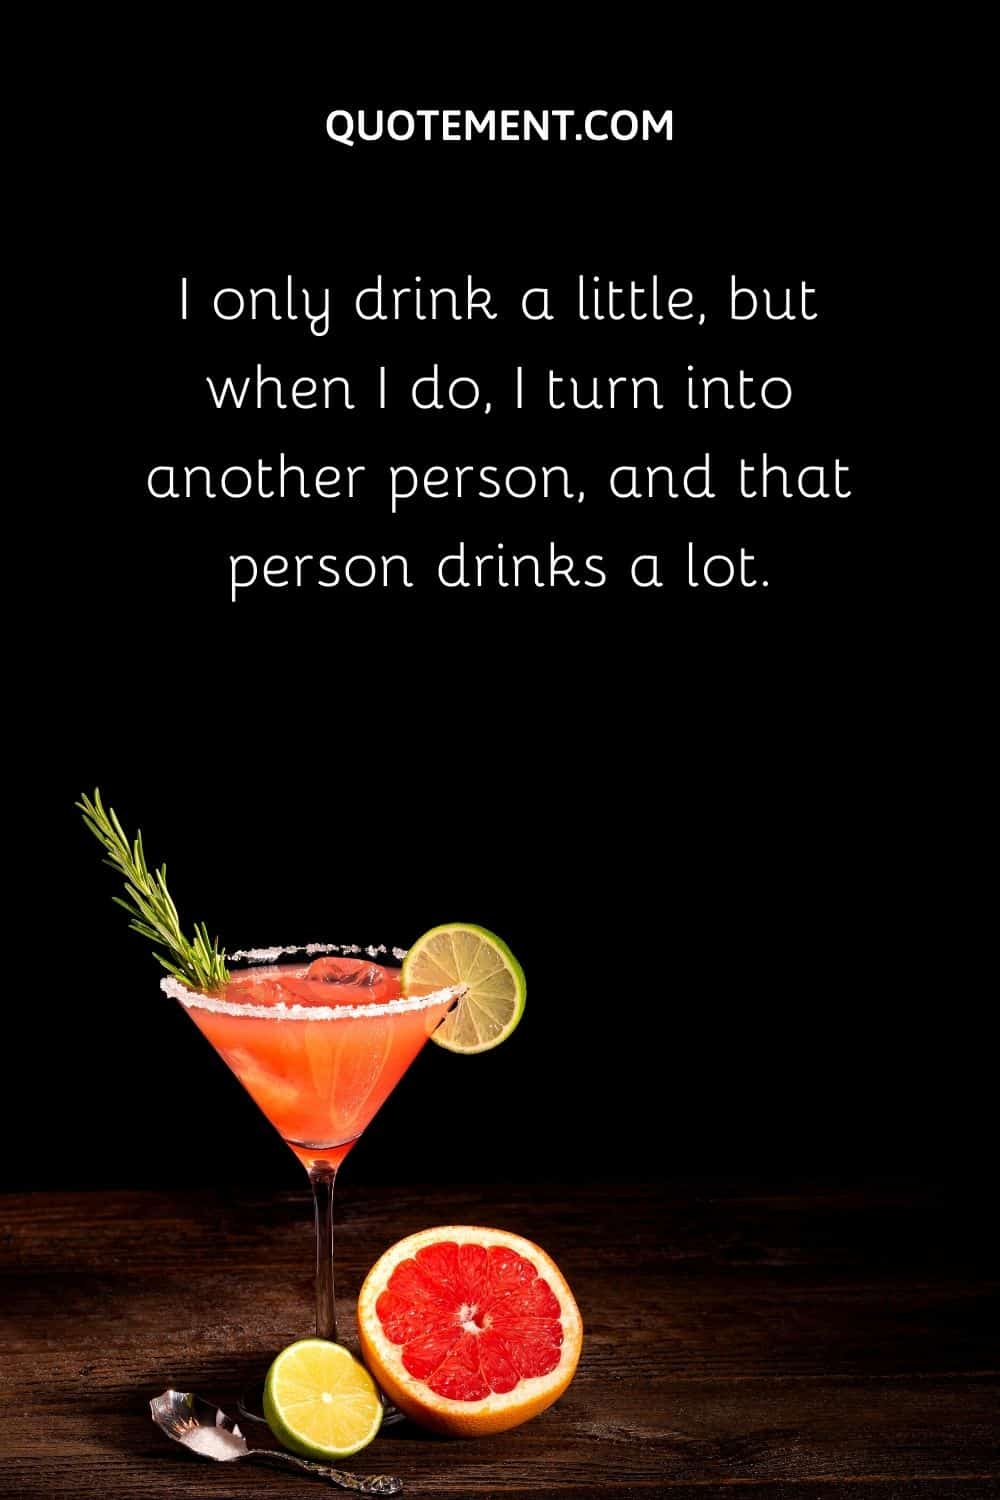 I only drink a little, but when I do, I turn into another person, and that person drinks a lot.